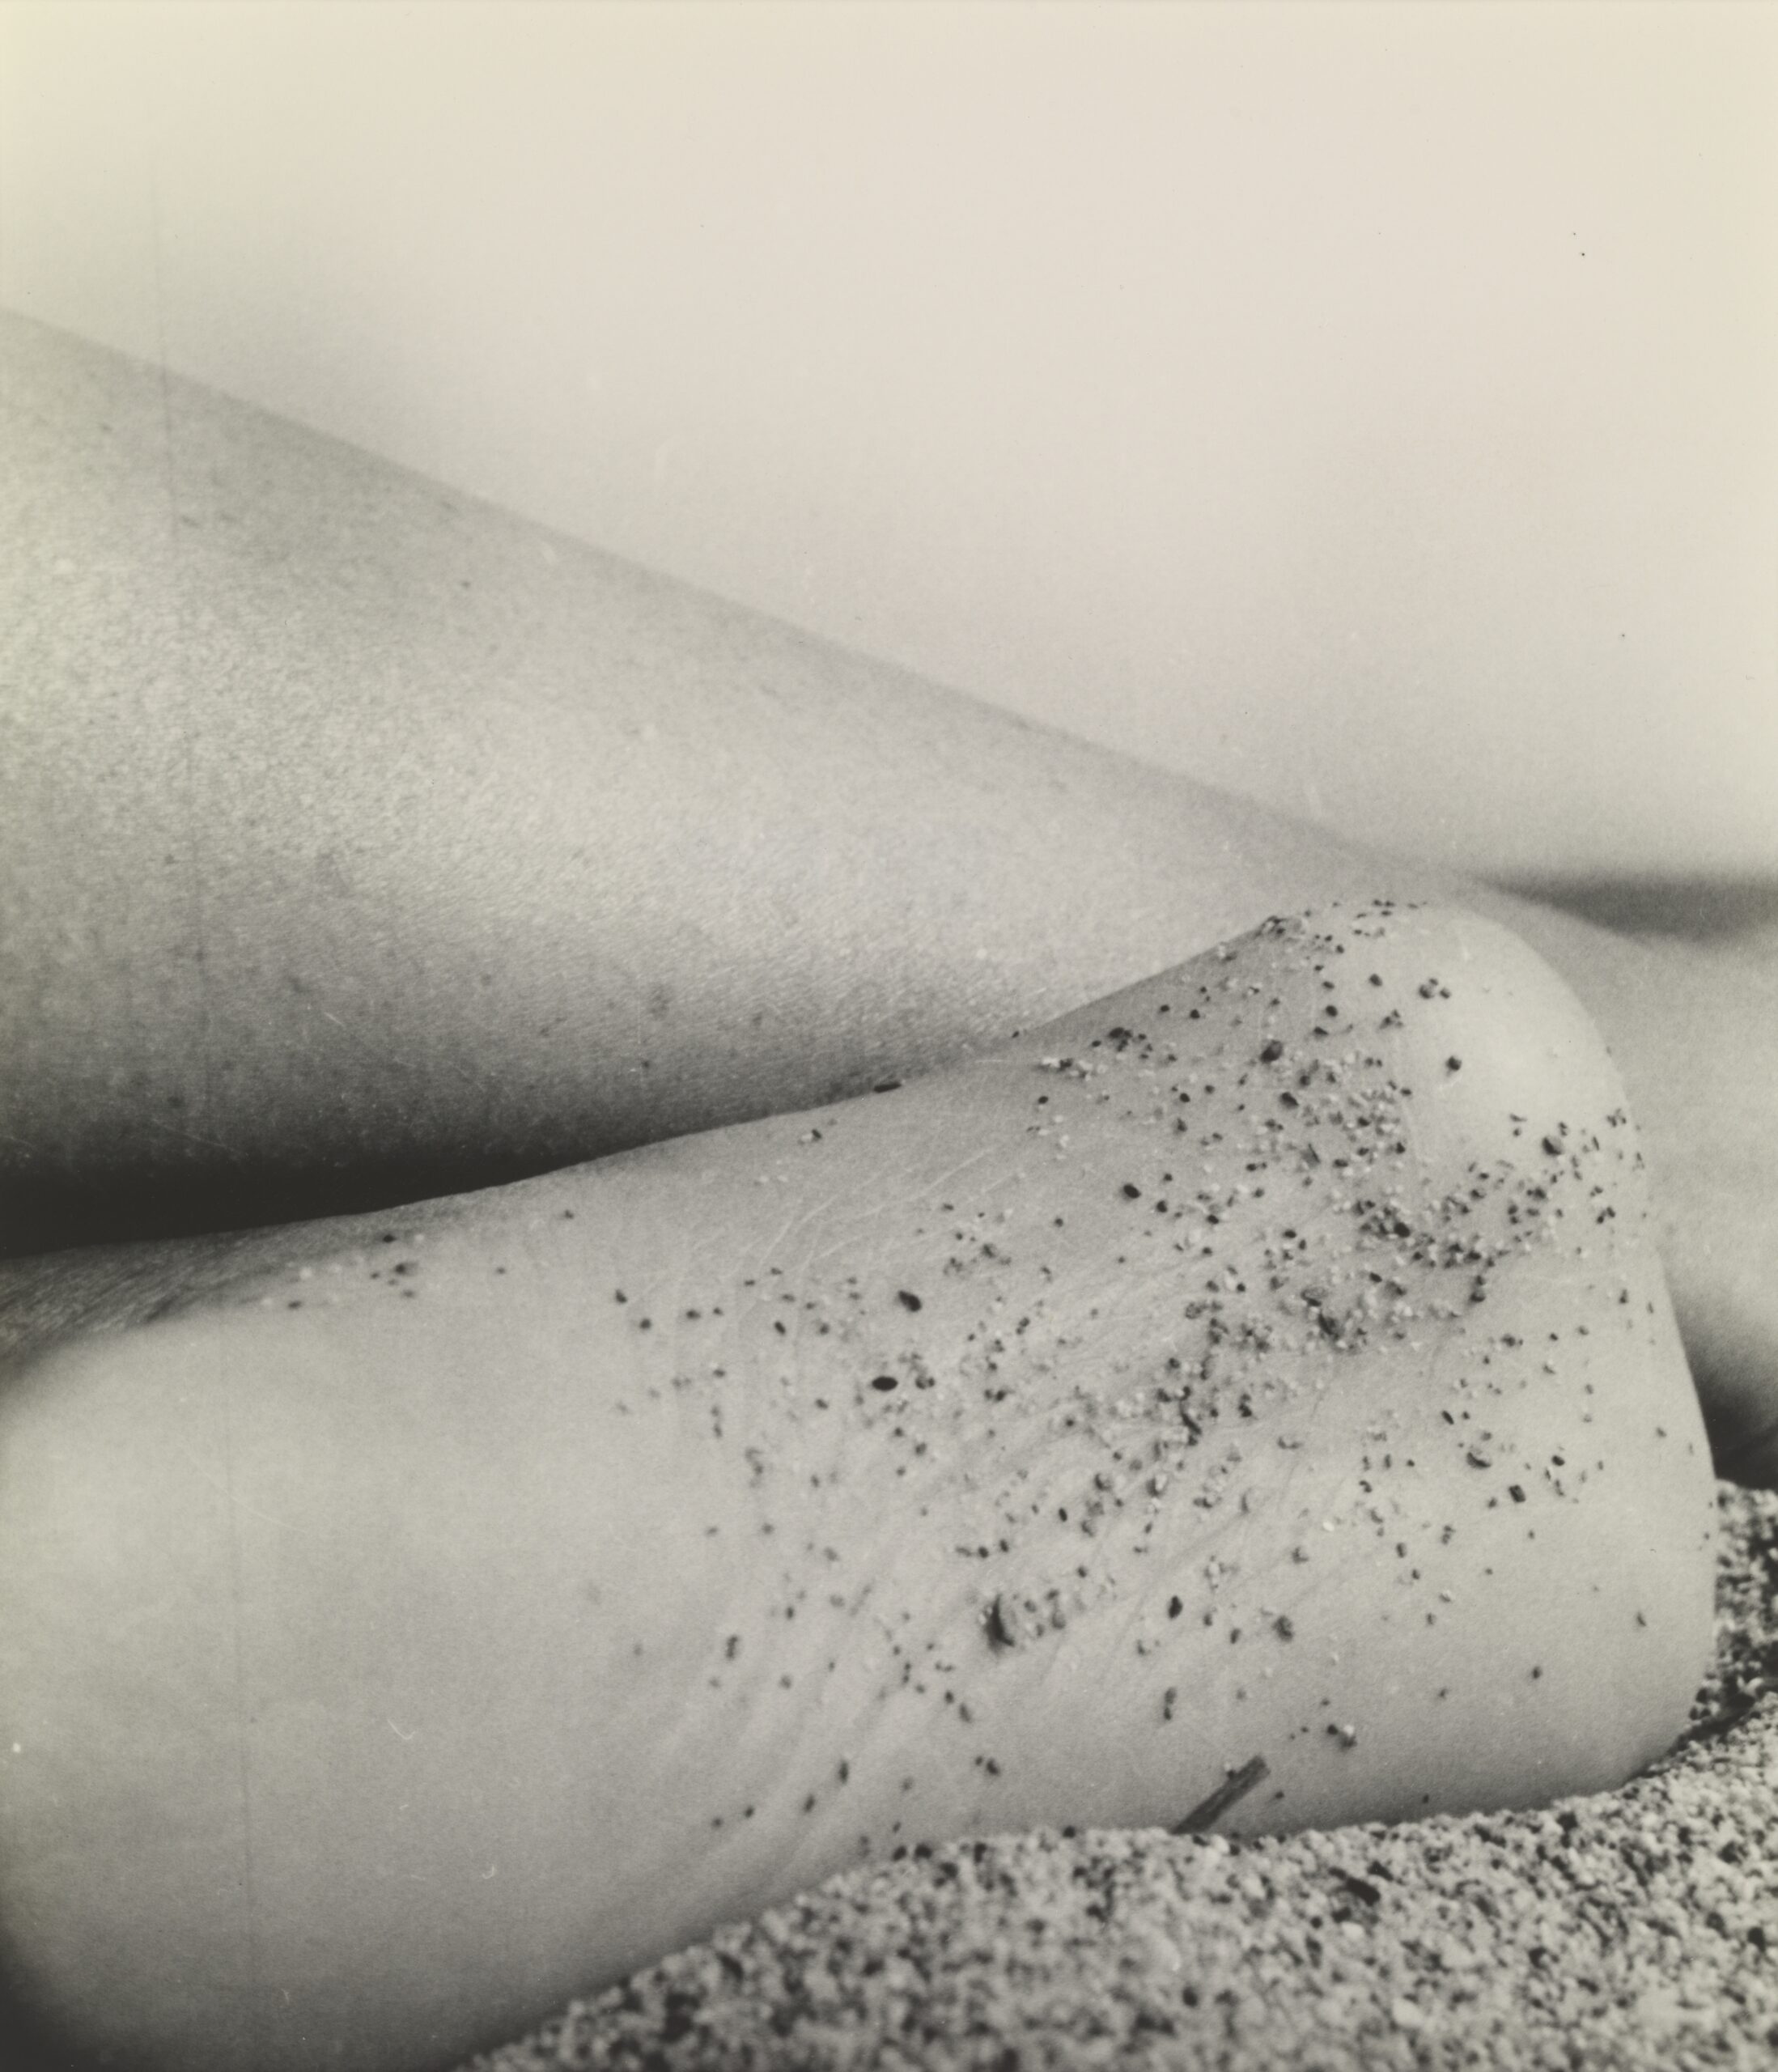 Bill Brandt, Nude, Taxo d’Aval, France 1957, later print. Tate. Accepted by HM Government in Lieu of Inheritance Tax and allocated to Tate 2019. © The Estate of Bill Brandt